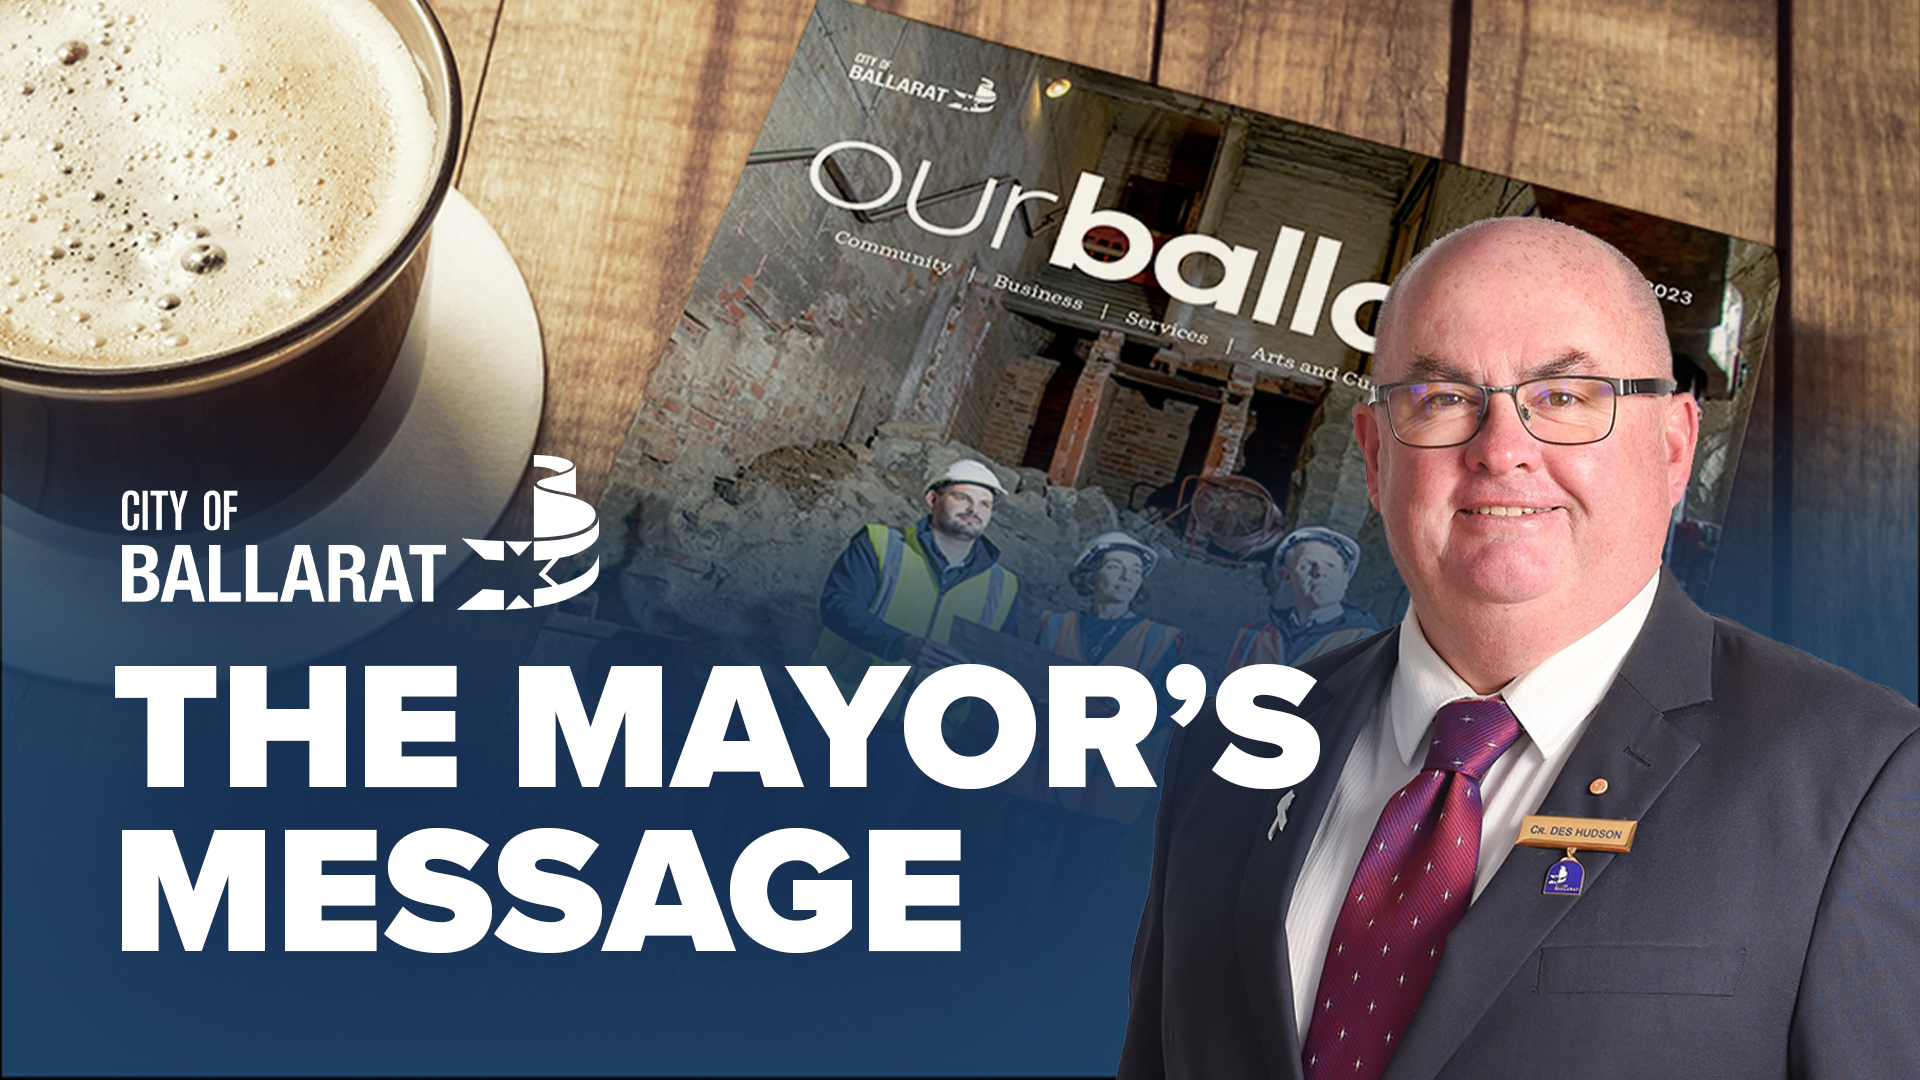 Text with The Mayor's Message with an image of Mayor Cr Des Hudson in front of an ourballarat magazine